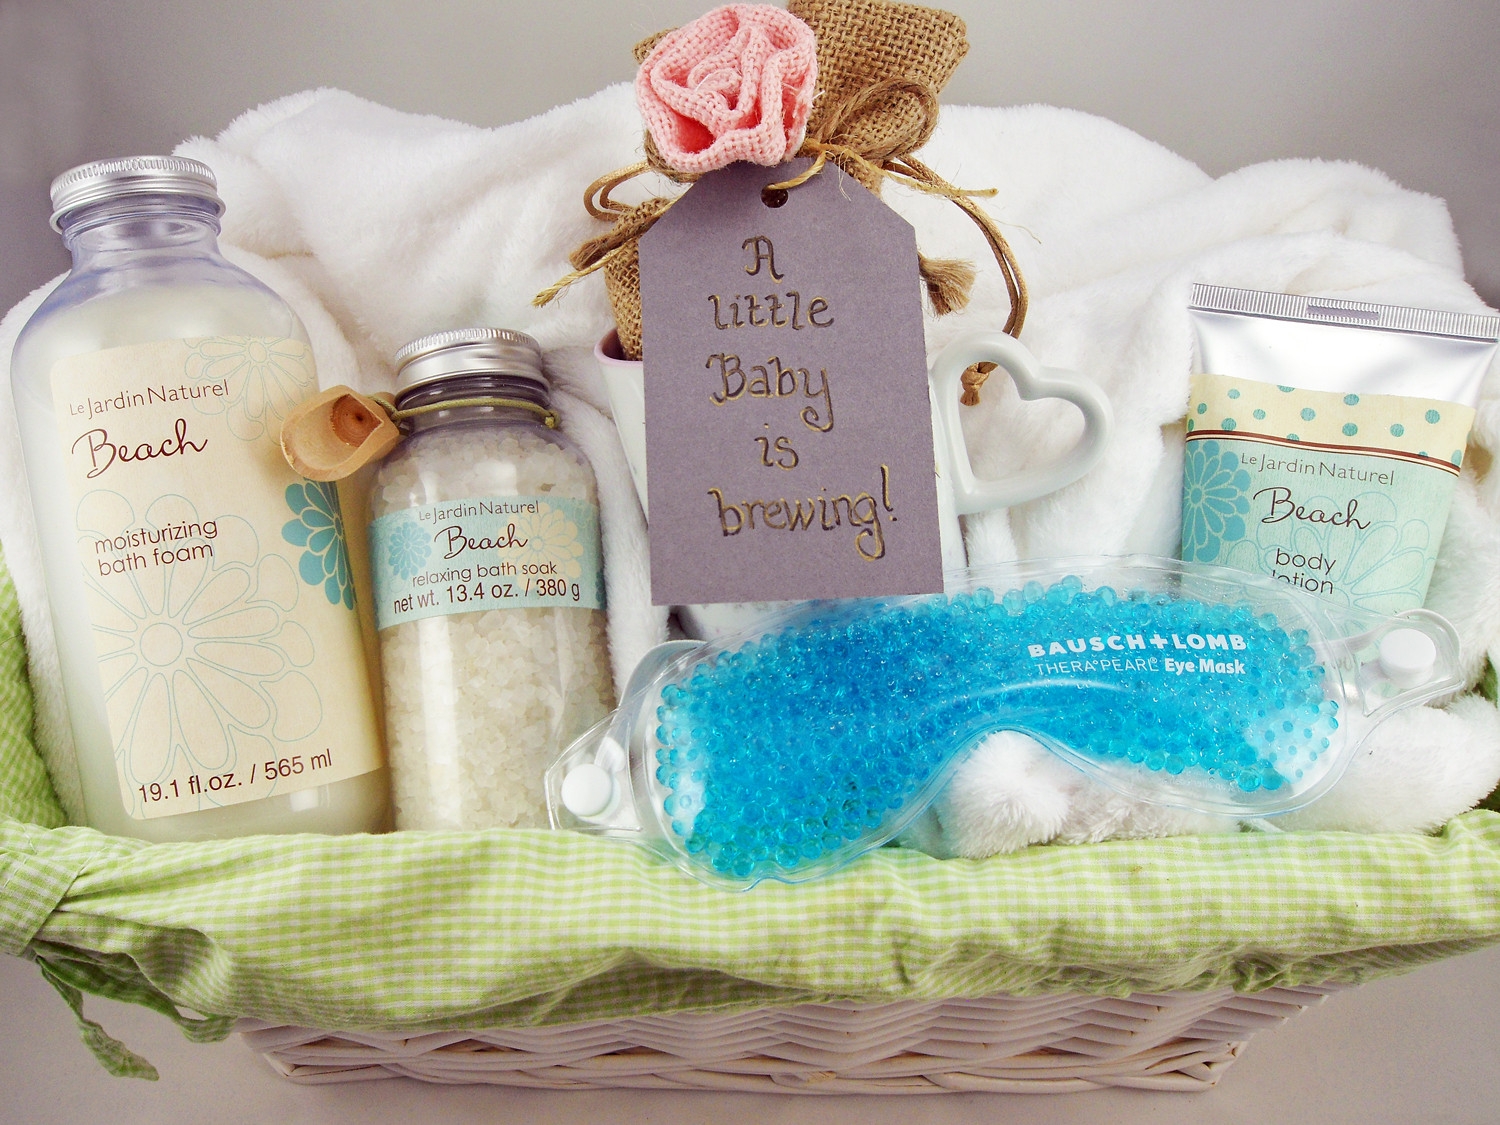 Unique Personalized Baby Gifts
 Expecting Couples Love These Unique Personalized Baby Gifts